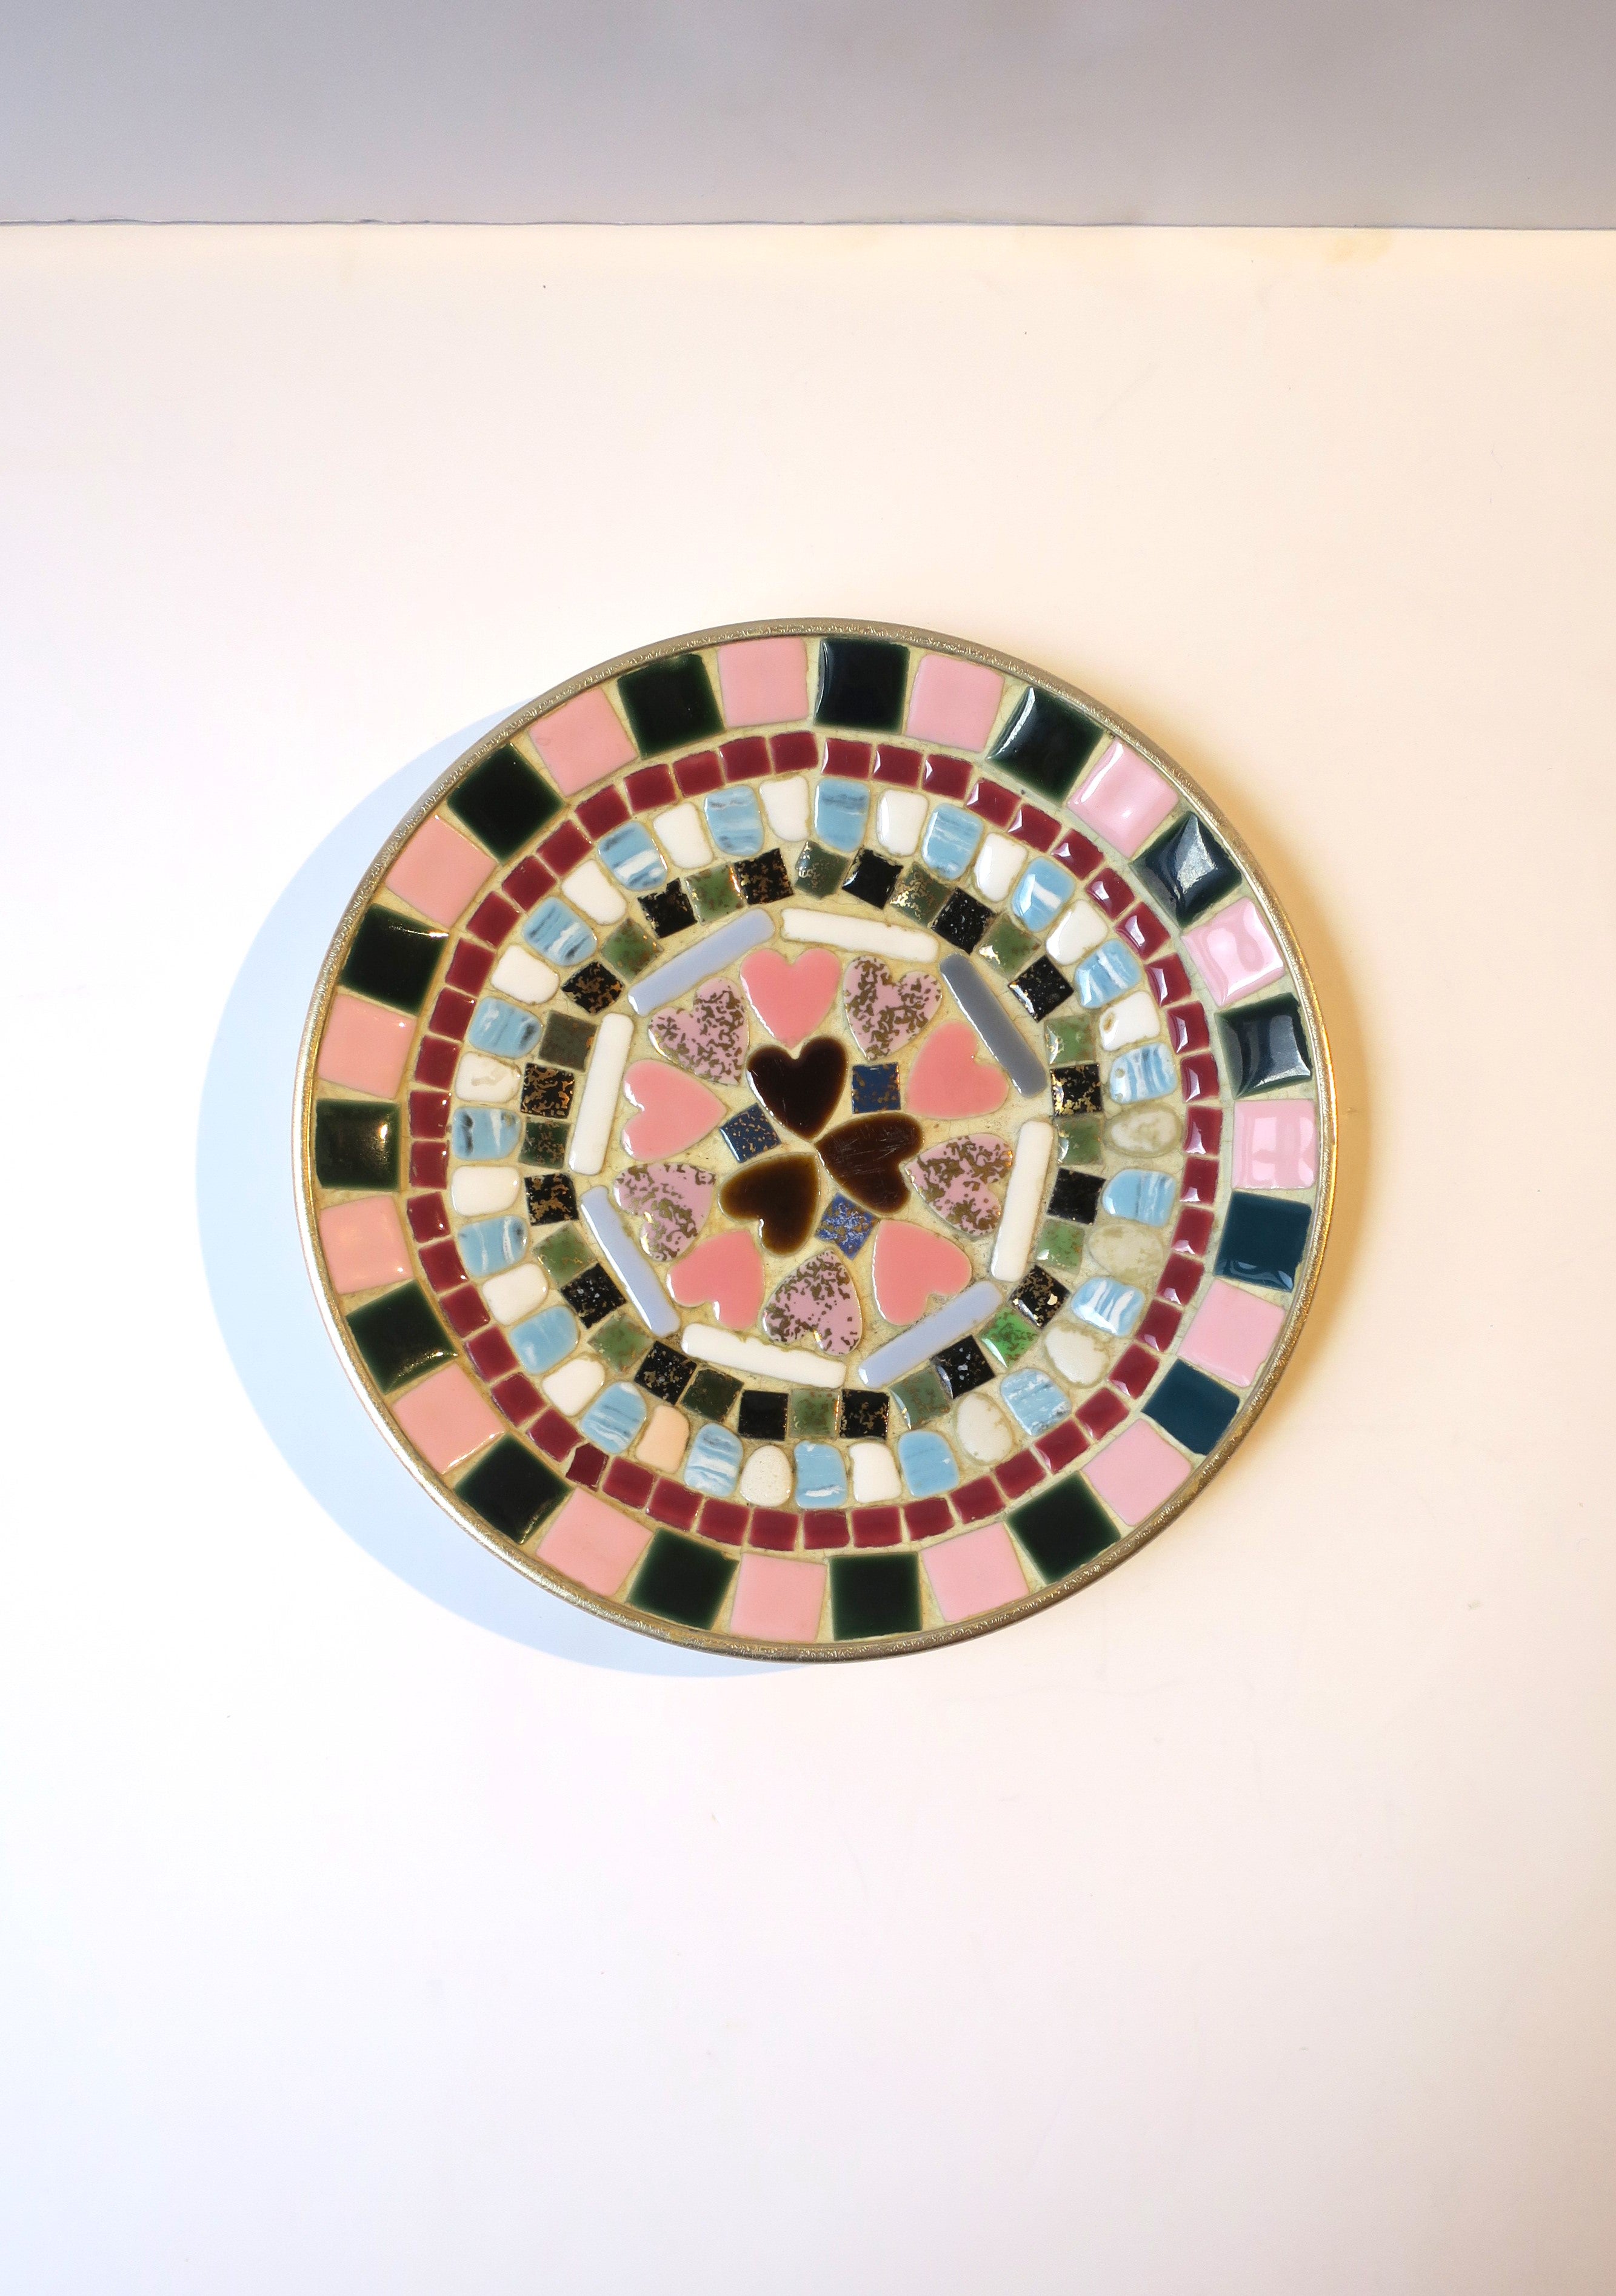 A ceramic tile mosaic dish catchall or vide-poche with pink hearts, circa mid-20th century, 1960s, USA. Dish is round; designed with square and rectangular tiles and a cluster of heart shaped tiles at centre. Tile colors include pastel pinks, light